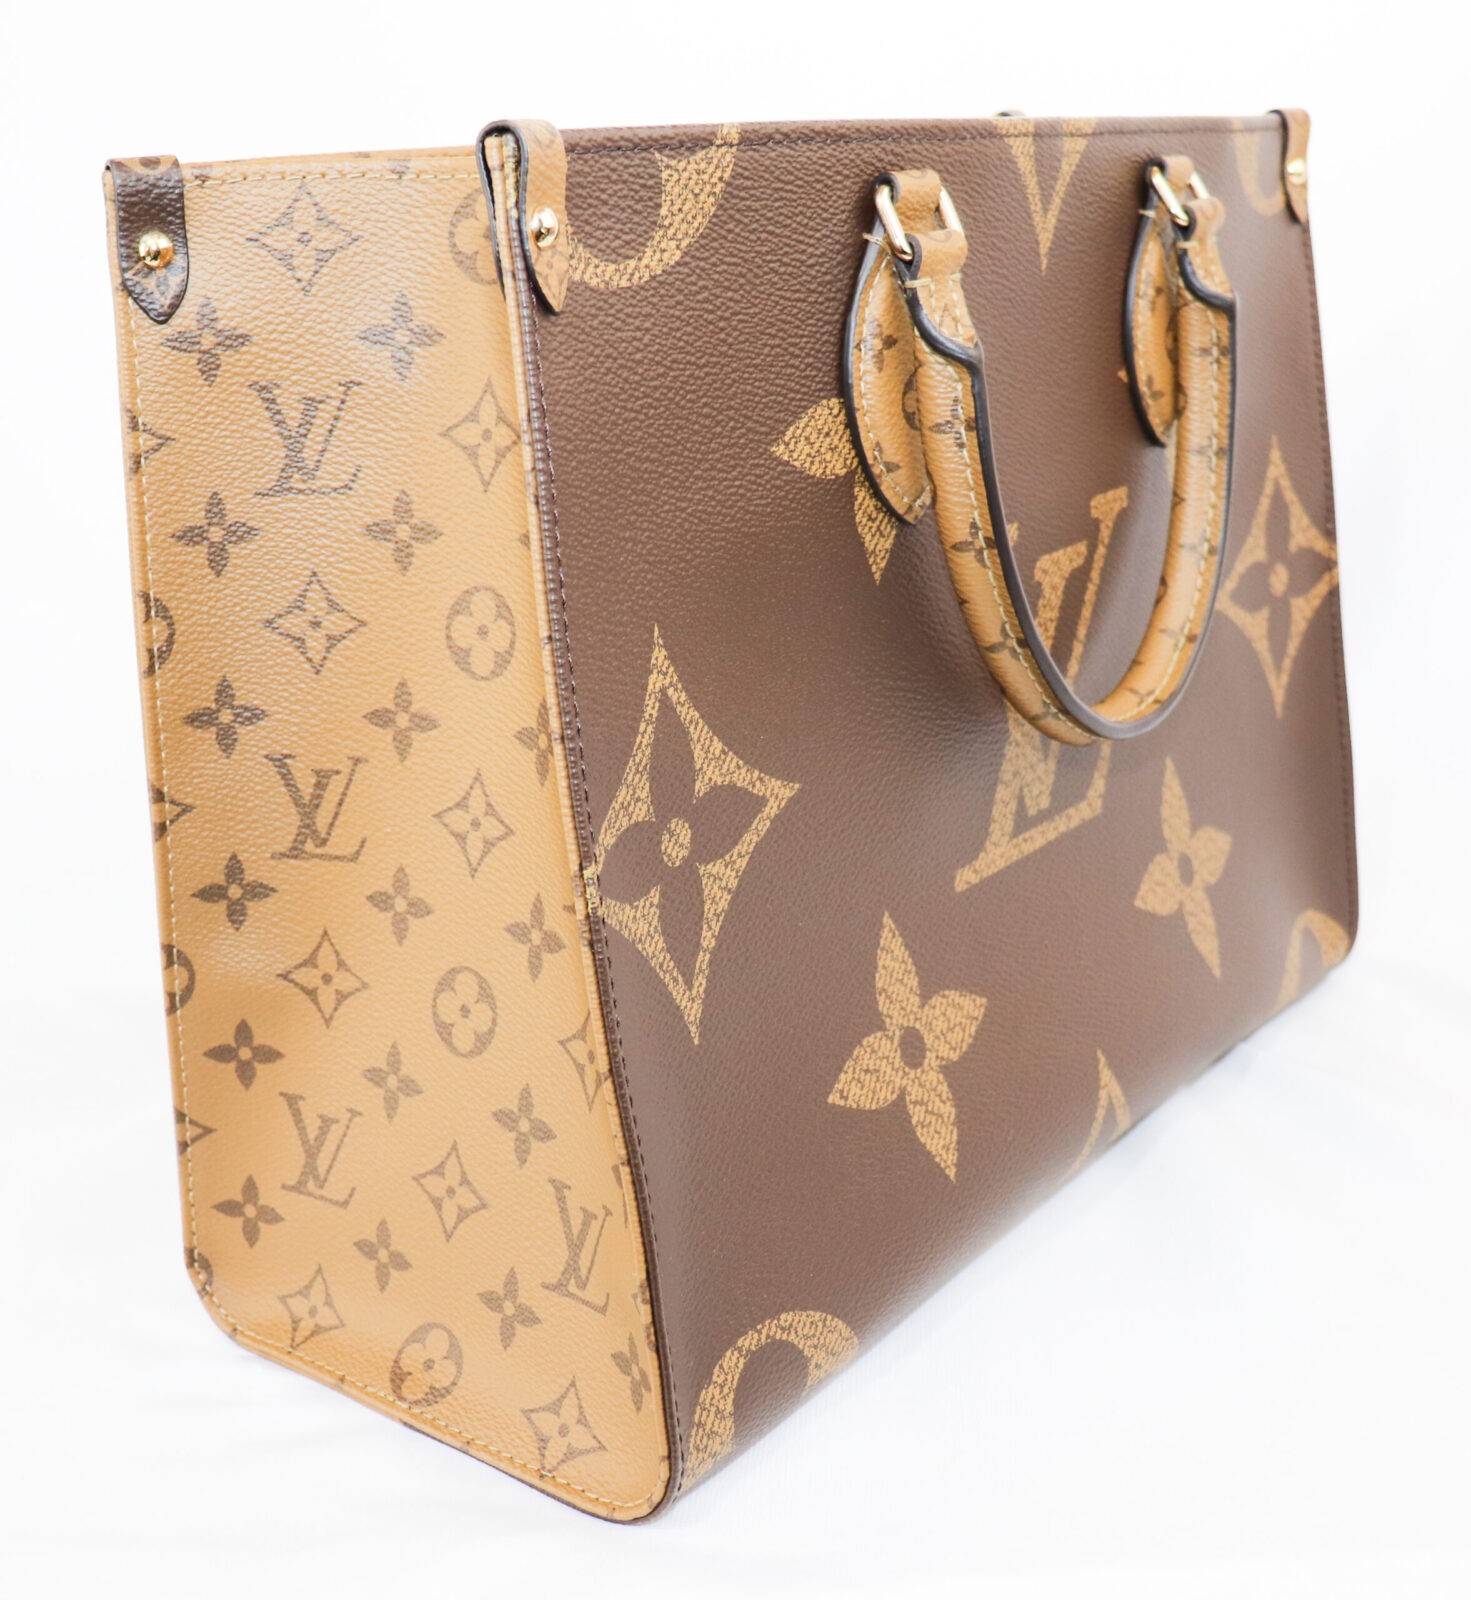 Lv On The Go Pm Mm Gme